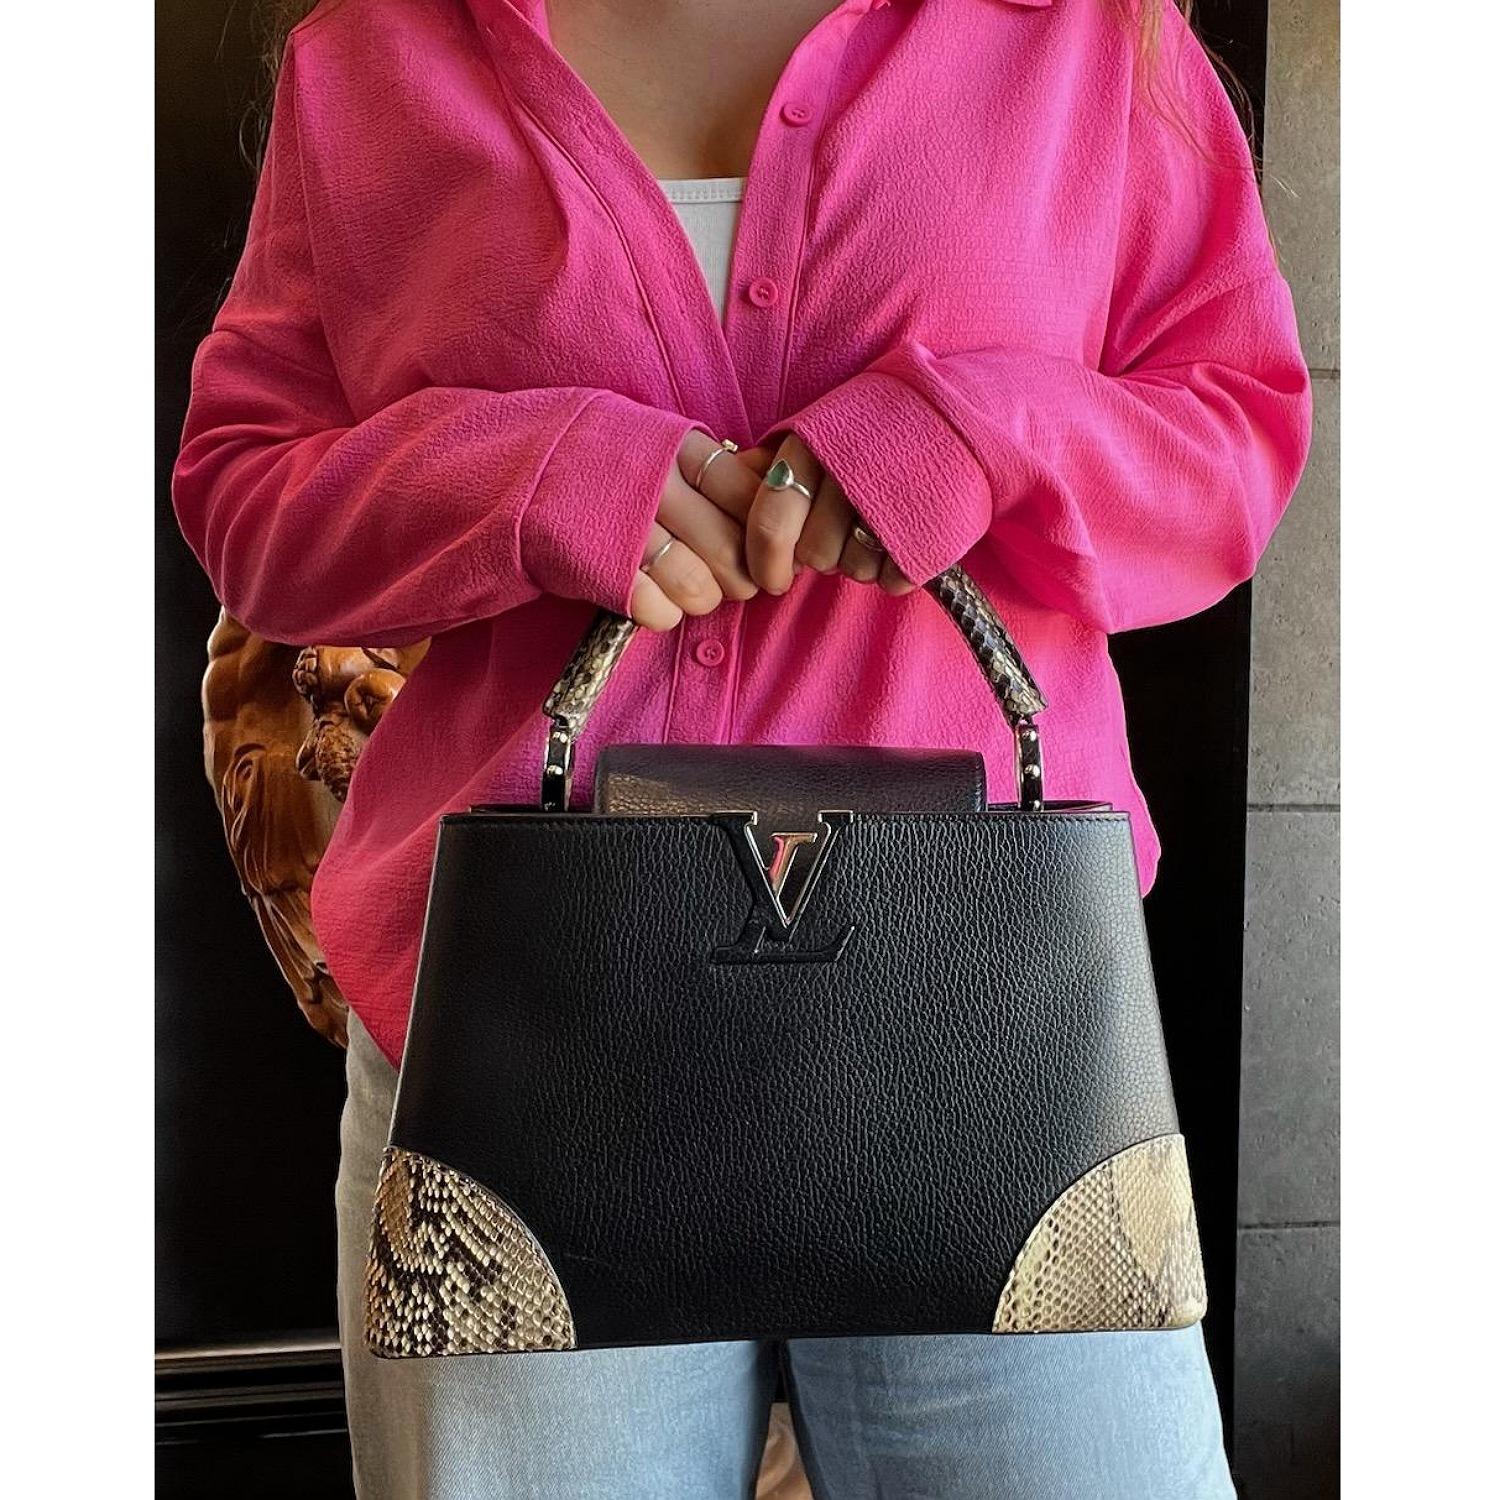 This stylish handbag is crafted of beautiful full grain taurillon calfskin leather in black. This stylish hand bag features a rolled watersnake top handle and trim, polished silver studded ring handle links. A small crossover flap with a silver